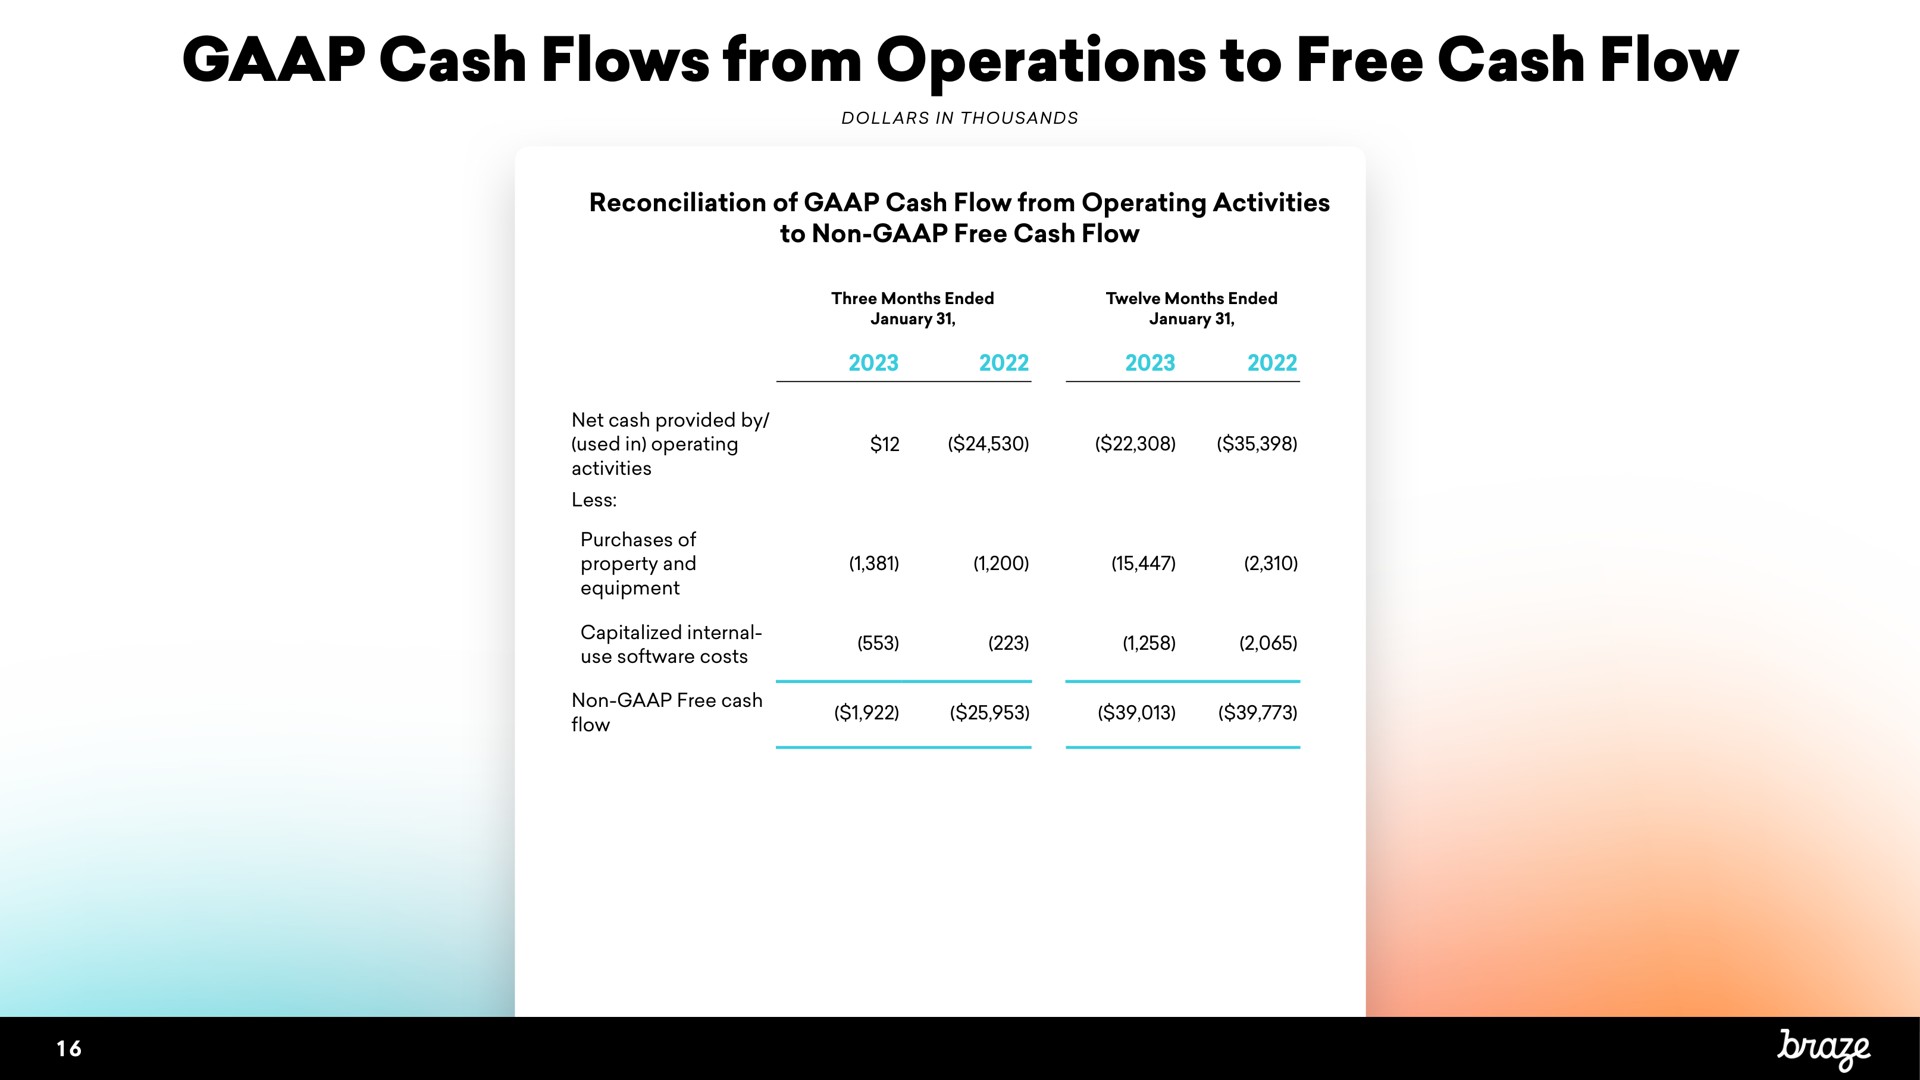 cash flows from operations to free cash flow capitalized internal | Braze